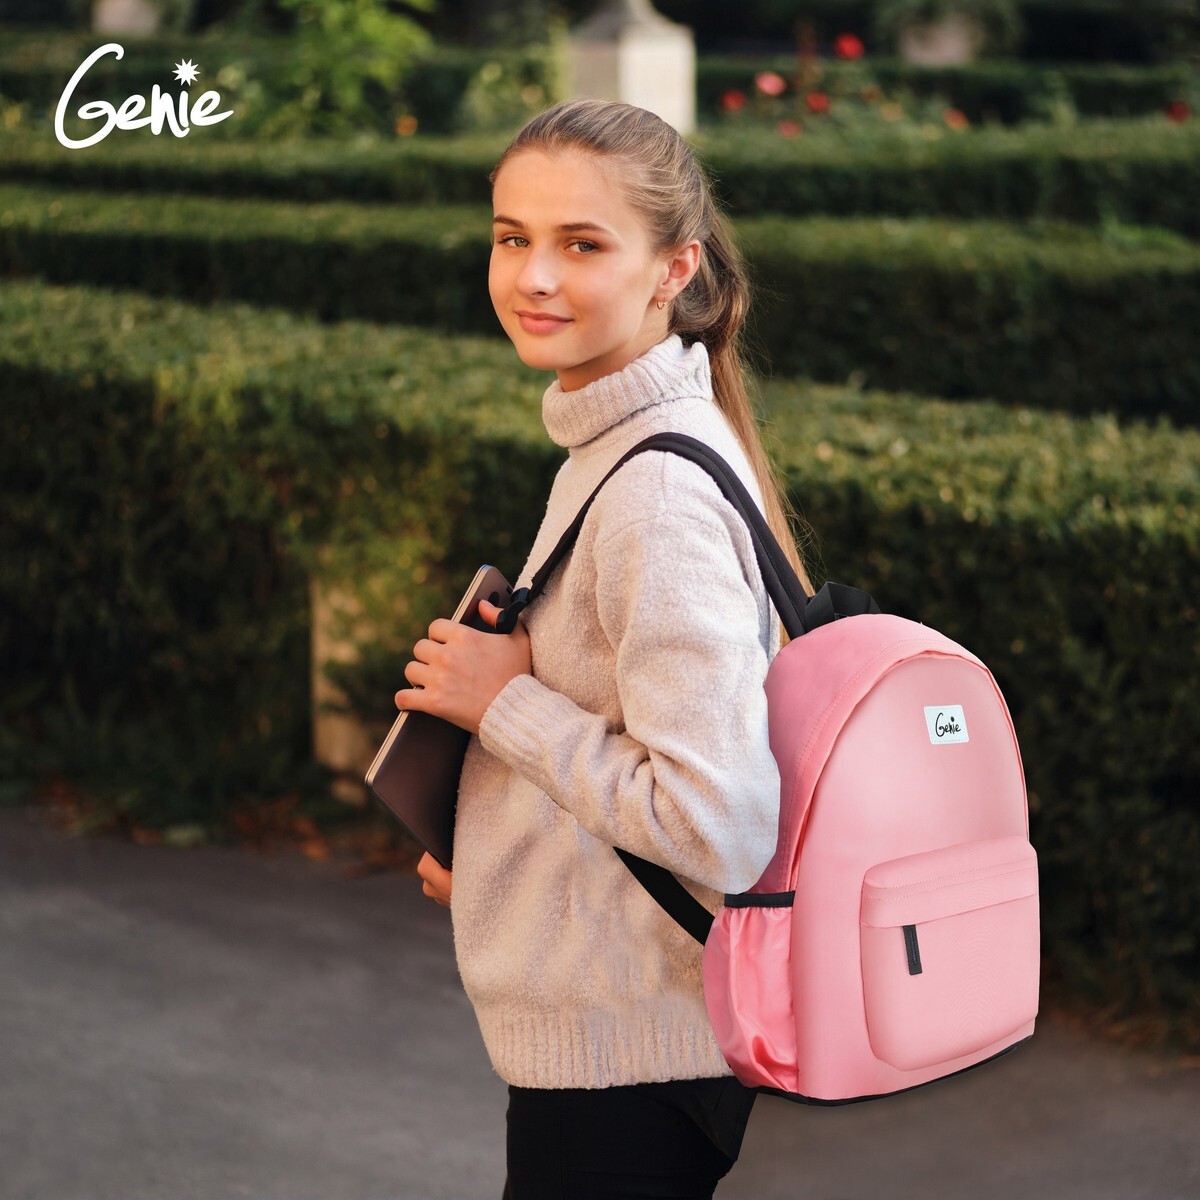 Genie Candy Back Pack 14in Pink